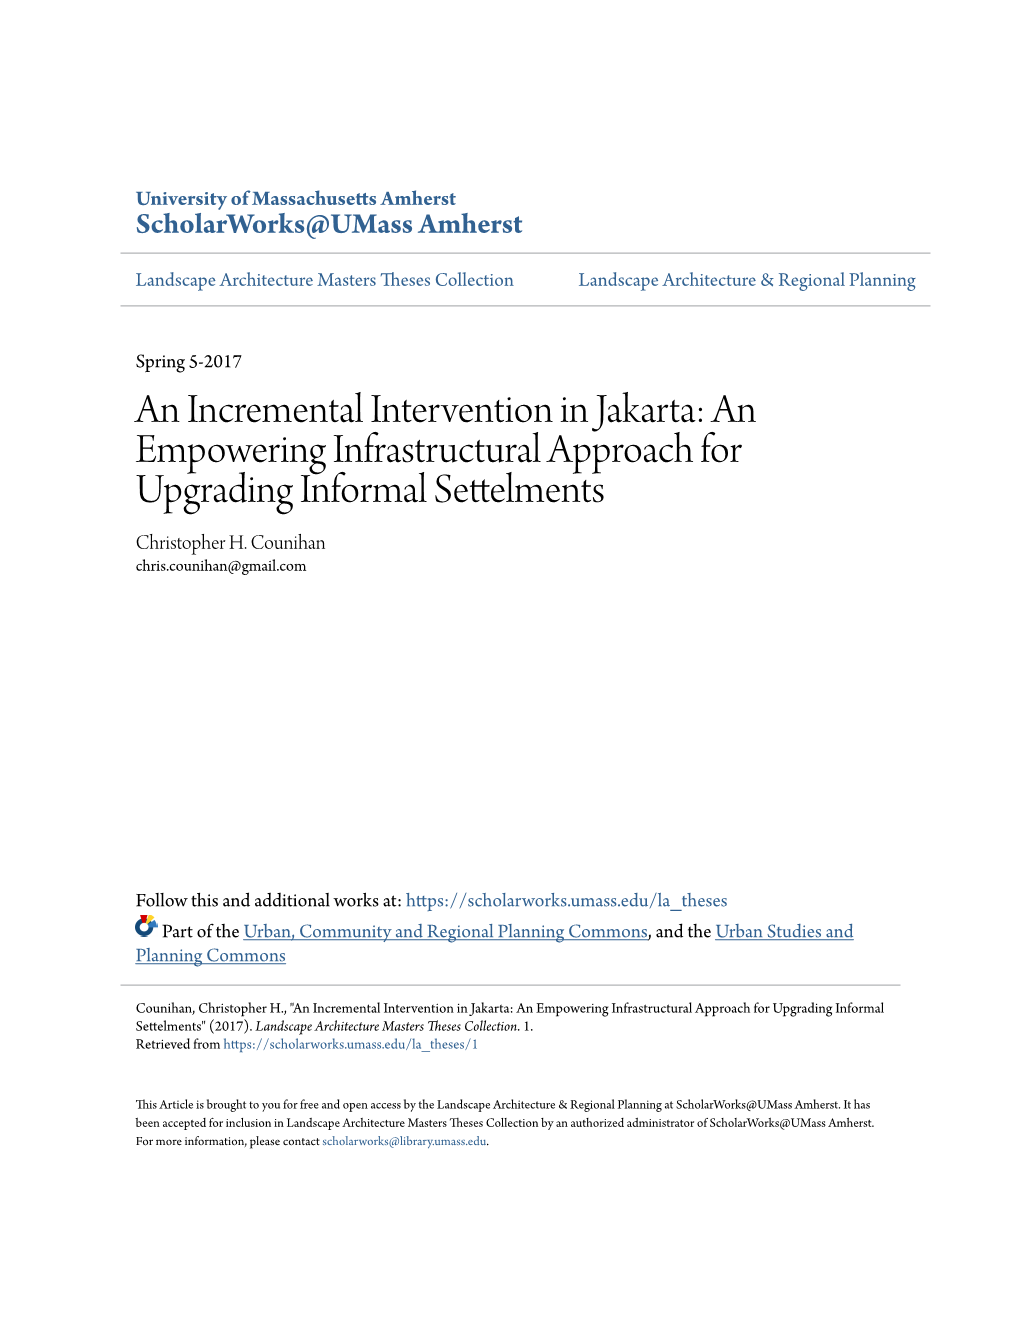 An Incremental Intervention in Jakarta: an Empowering Infrastructural Approach for Upgrading Informal Settelments Christopher H